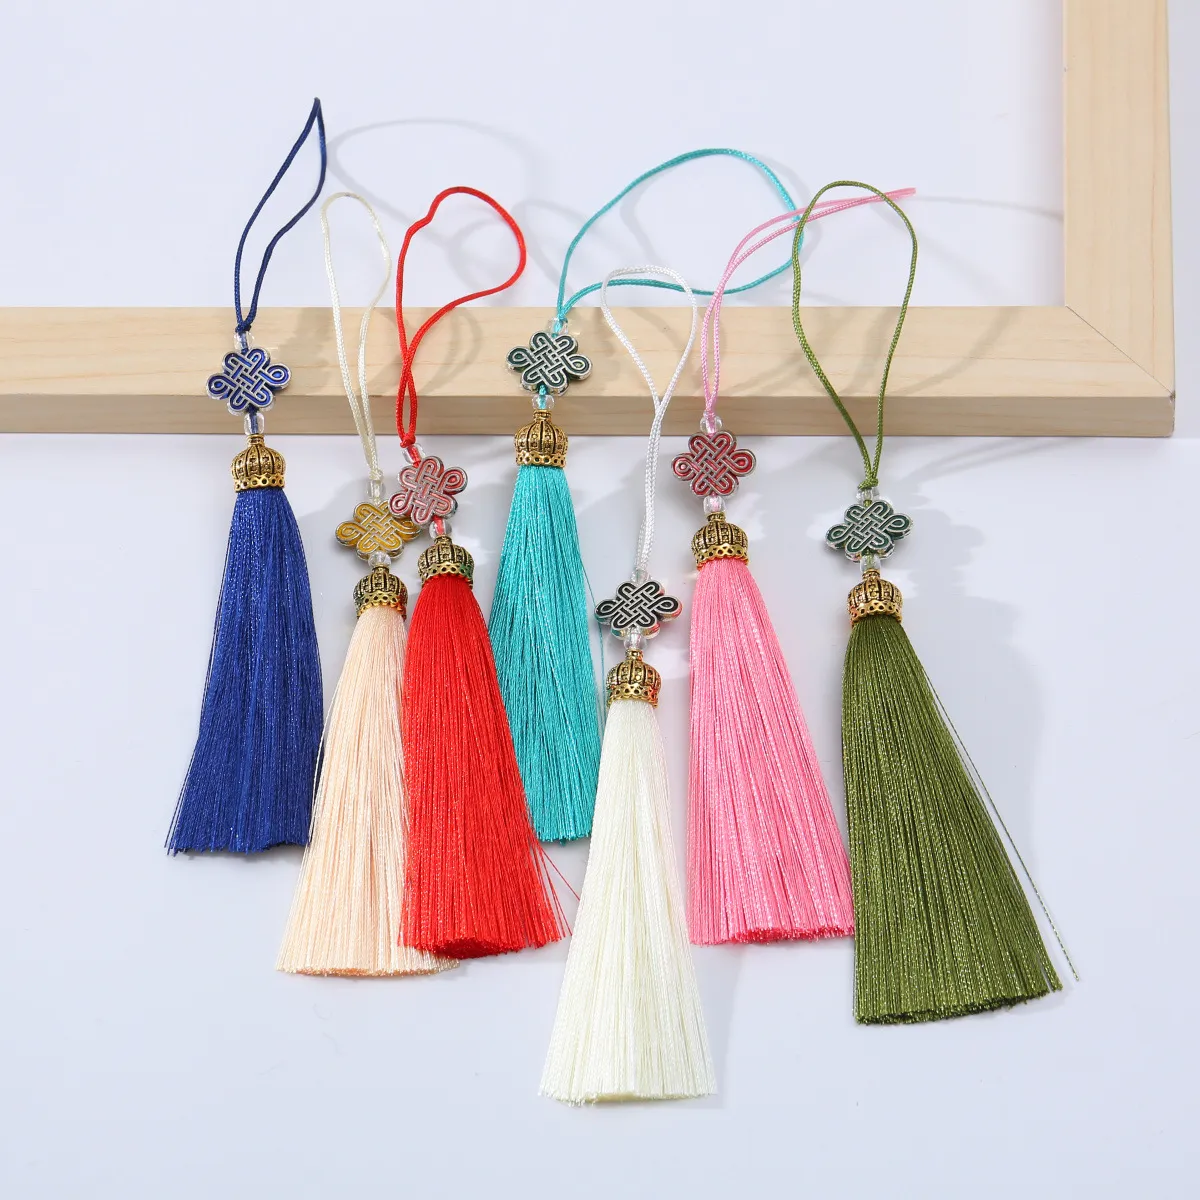 Lot 20pcs Components 8cm cloisonne Chinese knot ice silk tassels Charms for jewelry earrings curtains bookmarks Clothing